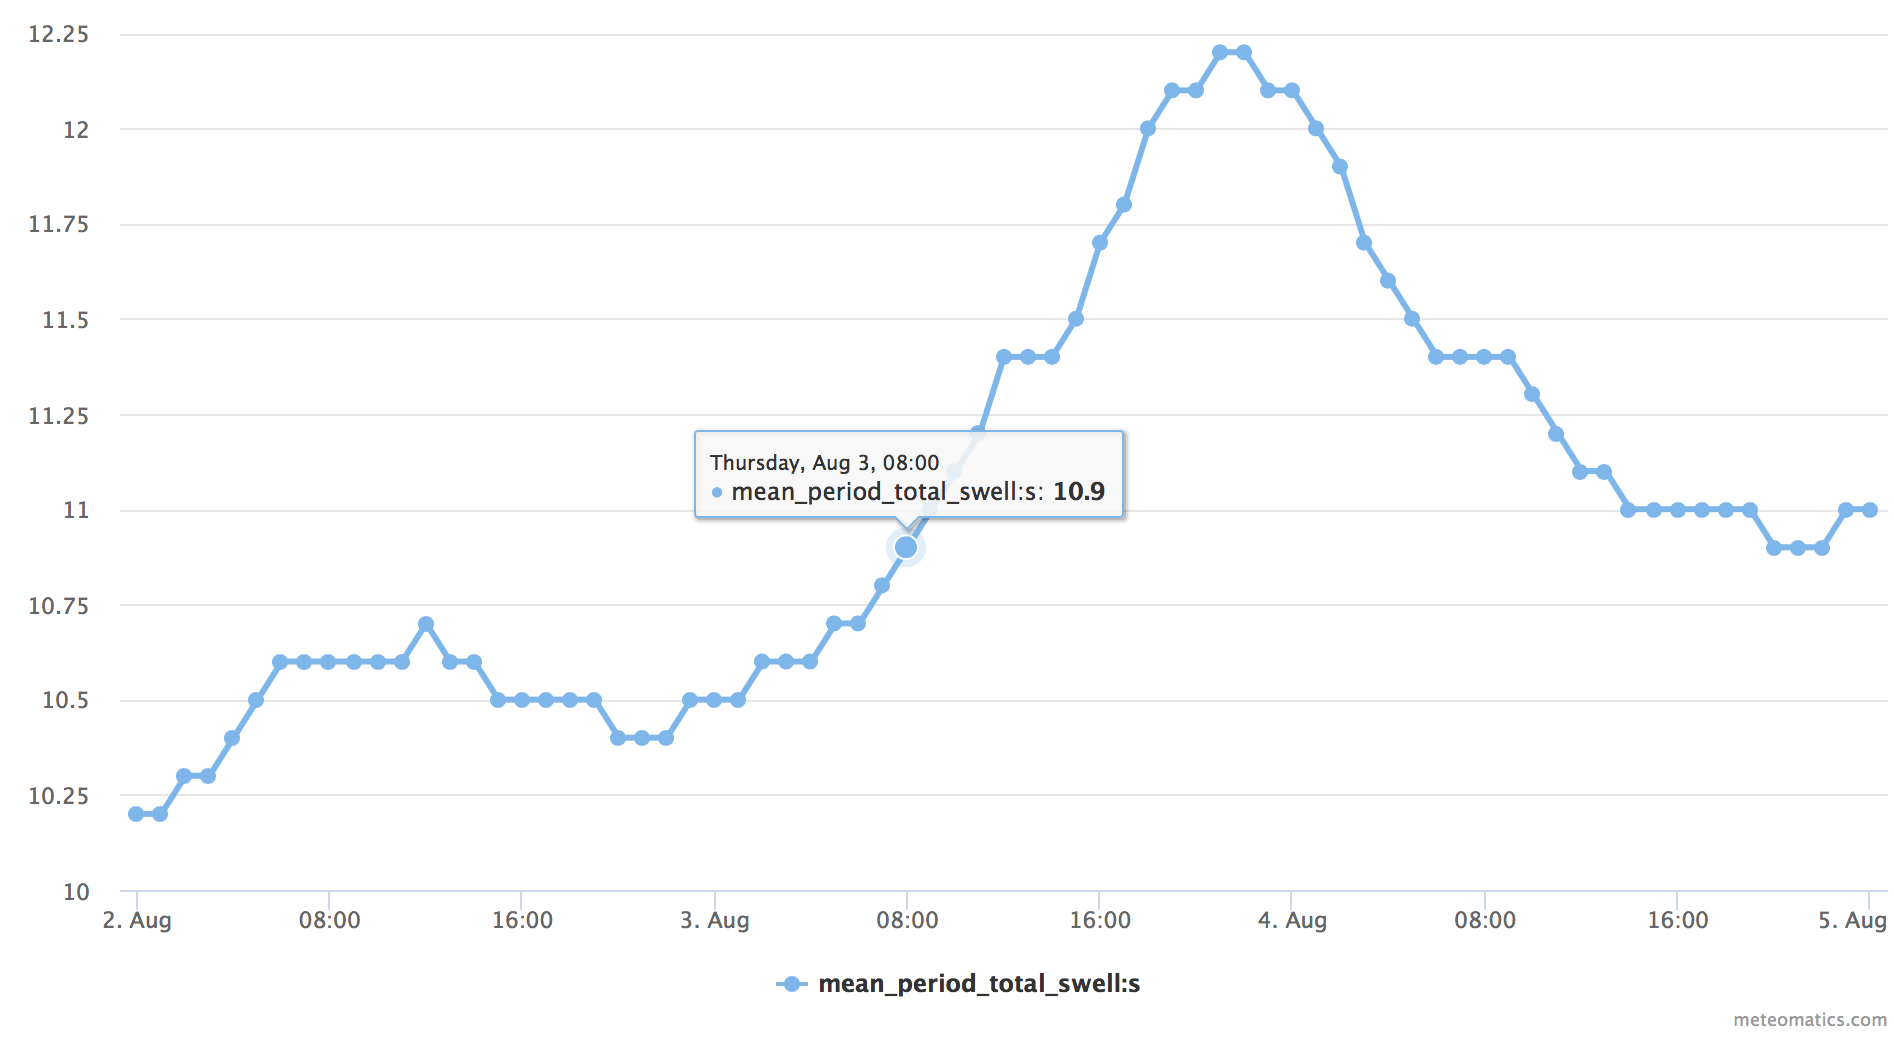 Mean period total swell timeseries